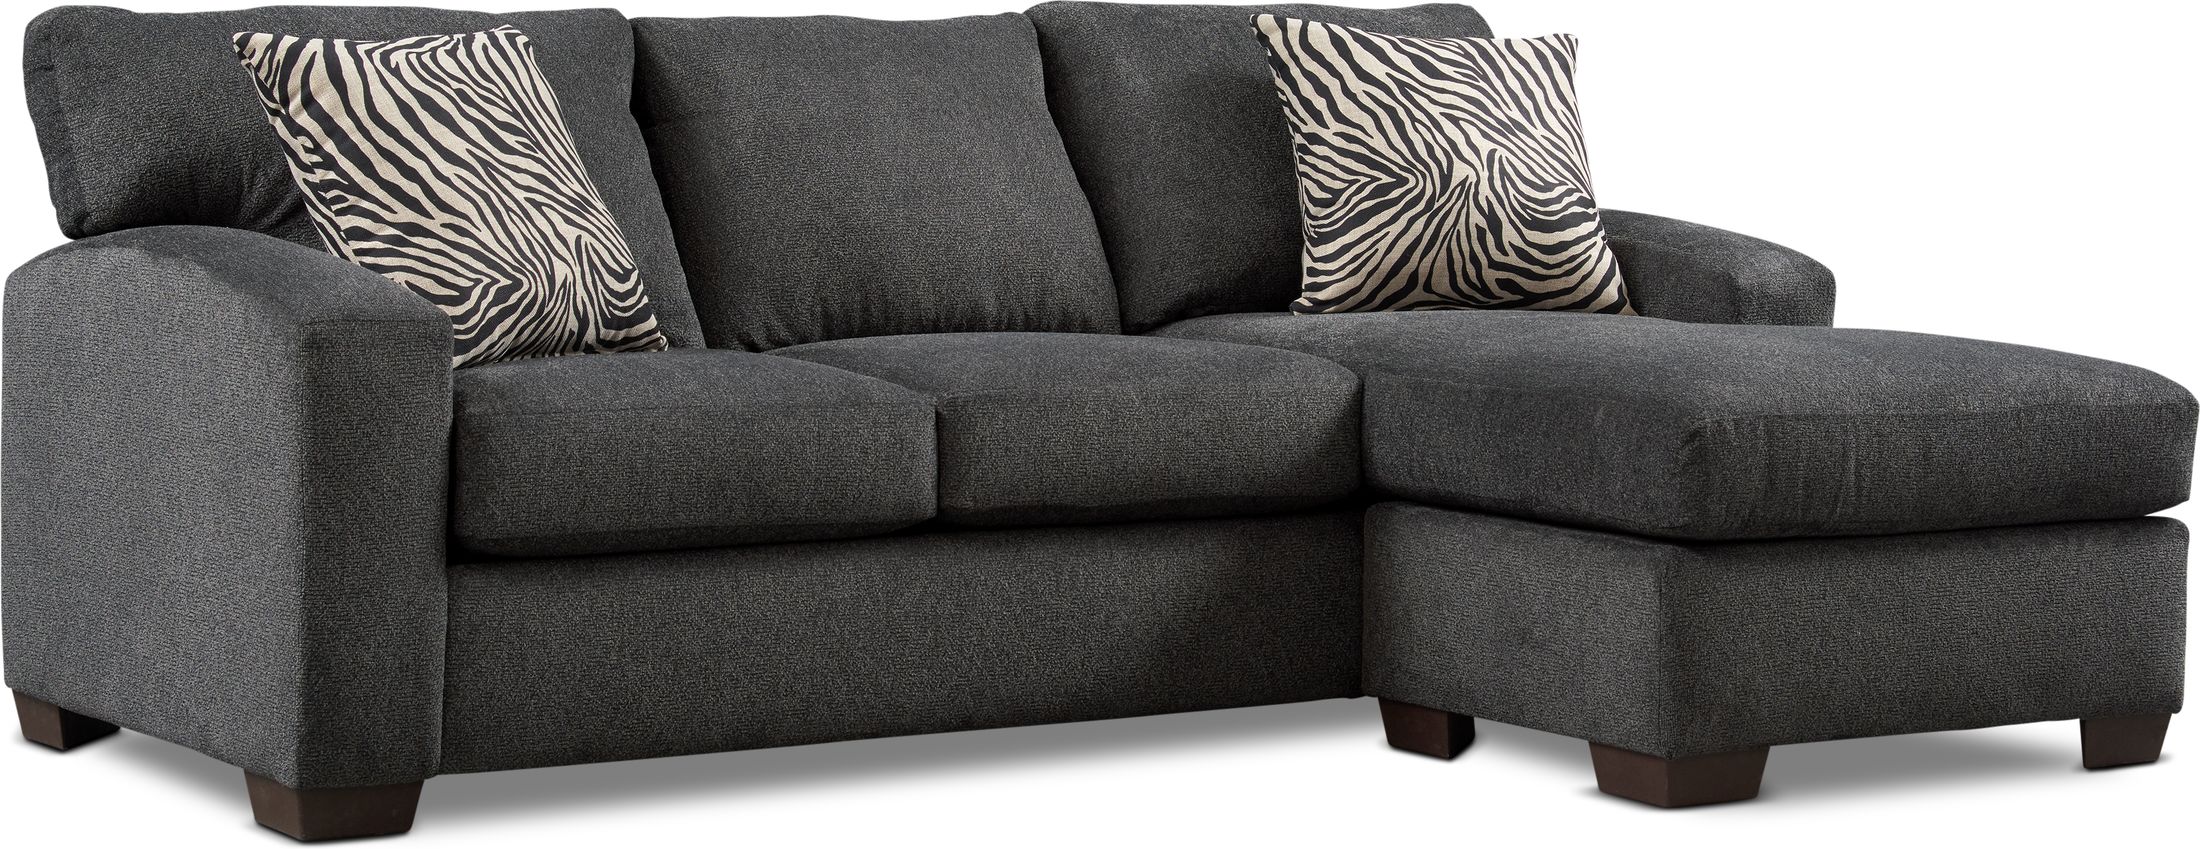 Nala 2 Piece Sectional With Chaise Value City Furniture